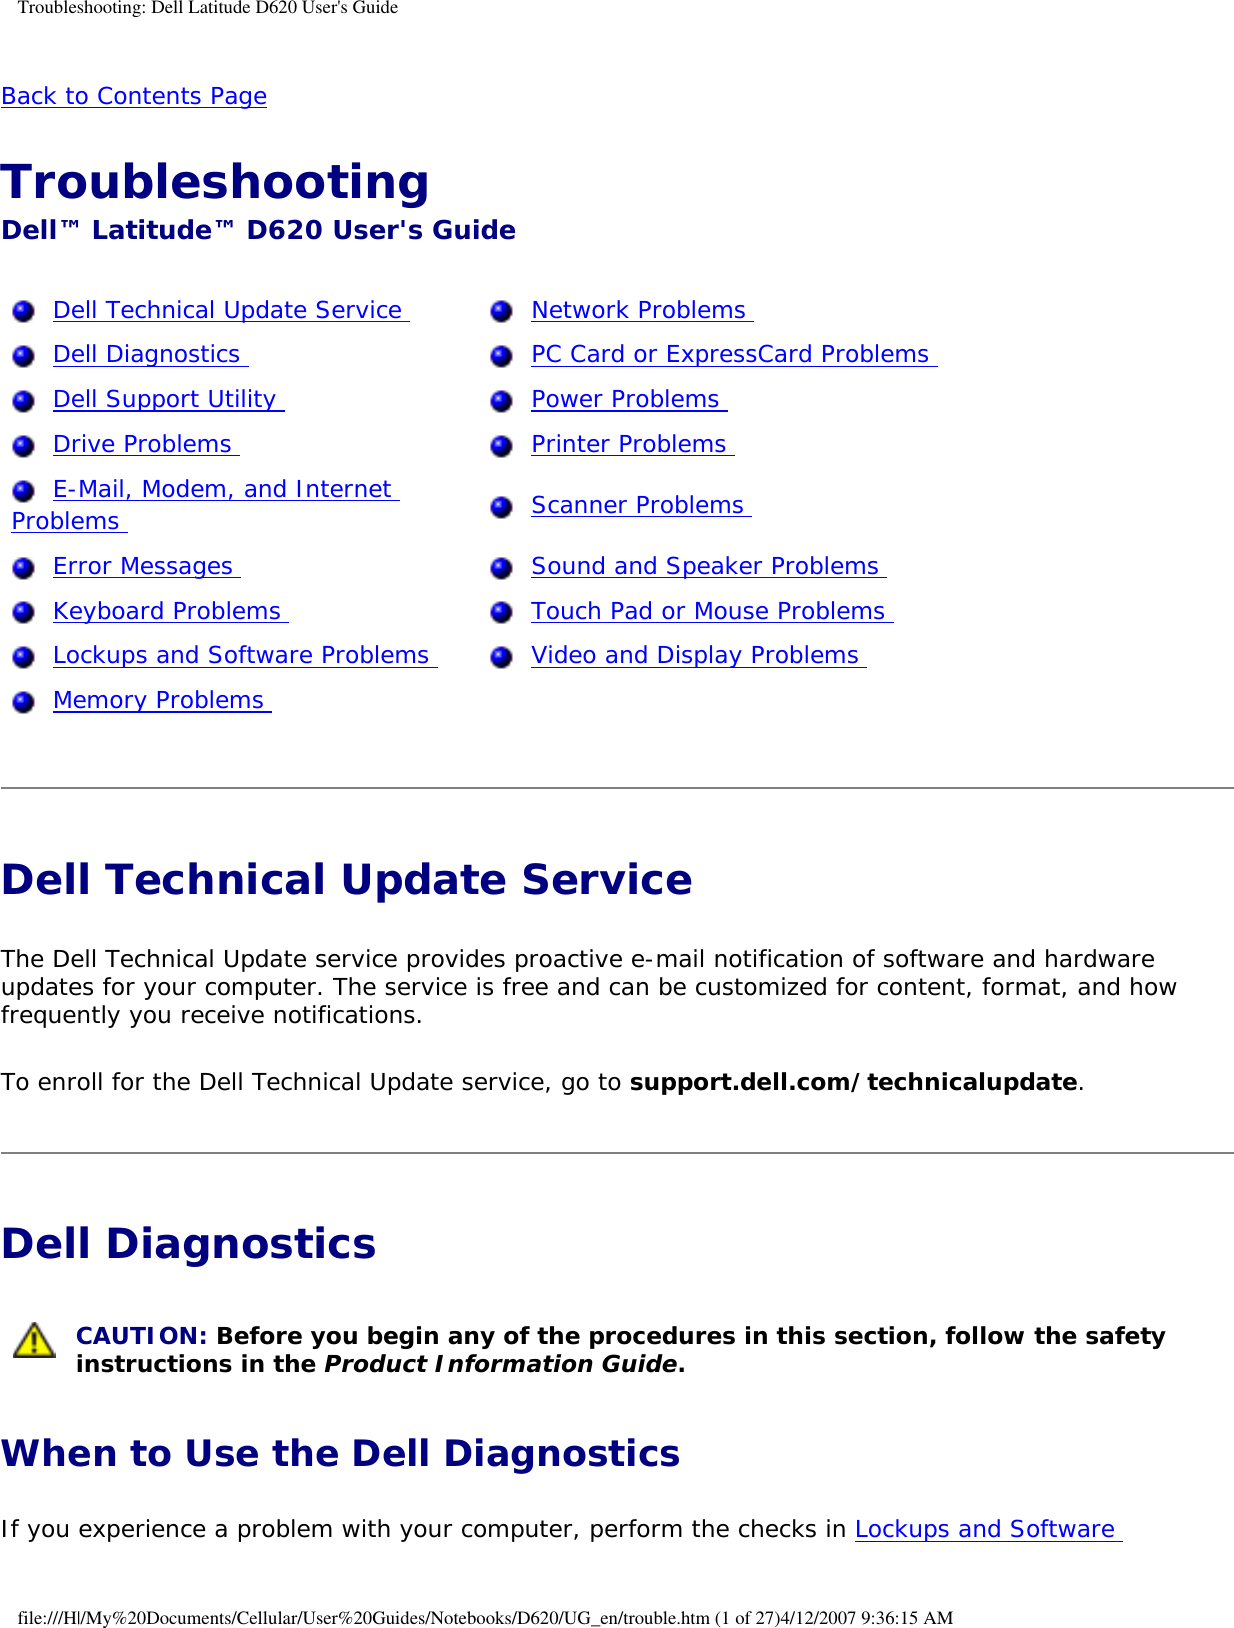 Troubleshooting: Dell Latitude D620 User&apos;s GuideBack to Contents Page Troubleshooting Dell™ Latitude™ D620 User&apos;s Guide  Dell Technical Update Service    Network Problems   Dell Diagnostics    PC Card or ExpressCard Problems   Dell Support Utility    Power Problems   Drive Problems    Printer Problems   E-Mail, Modem, and Internet Problems    Scanner Problems   Error Messages    Sound and Speaker Problems   Keyboard Problems    Touch Pad or Mouse Problems   Lockups and Software Problems    Video and Display Problems   Memory Problems    Dell Technical Update Service The Dell Technical Update service provides proactive e-mail notification of software and hardware updates for your computer. The service is free and can be customized for content, format, and how frequently you receive notifications.To enroll for the Dell Technical Update service, go to support.dell.com/technicalupdate.Dell Diagnostics  CAUTION: Before you begin any of the procedures in this section, follow the safety instructions in the Product Information Guide.When to Use the Dell DiagnosticsIf you experience a problem with your computer, perform the checks in Lockups and Software file:///H|/My%20Documents/Cellular/User%20Guides/Notebooks/D620/UG_en/trouble.htm (1 of 27)4/12/2007 9:36:15 AM